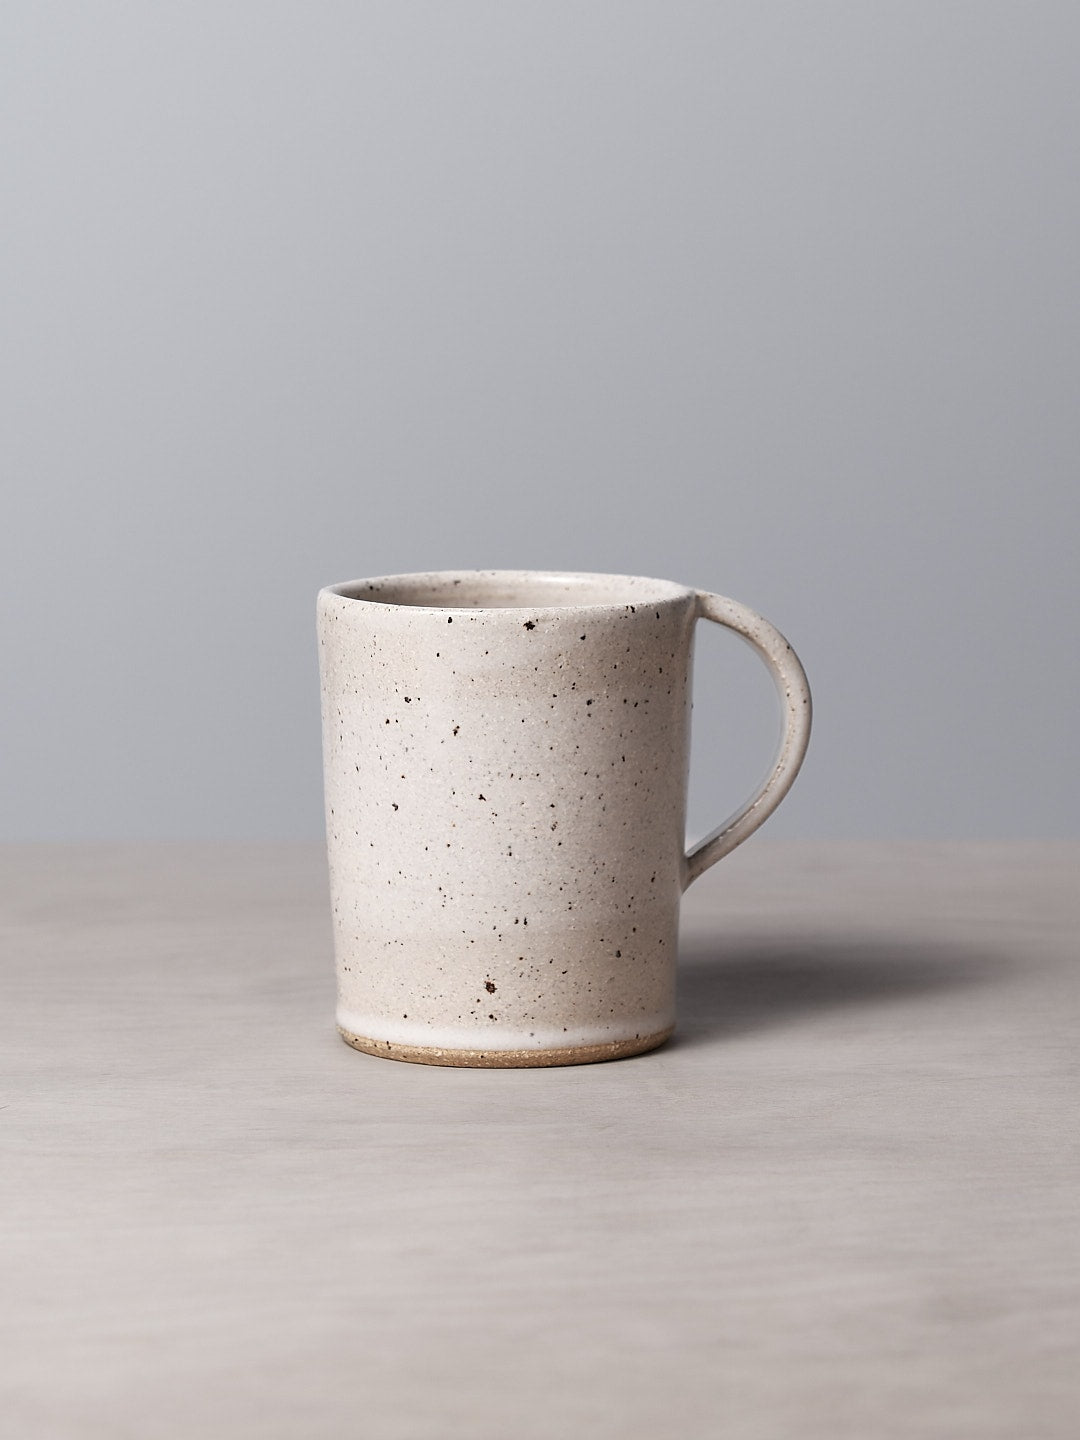 A handmade Speckled mug with a satin glaze sitting on a table with a grey background, made by Nicola Shuttleworth.